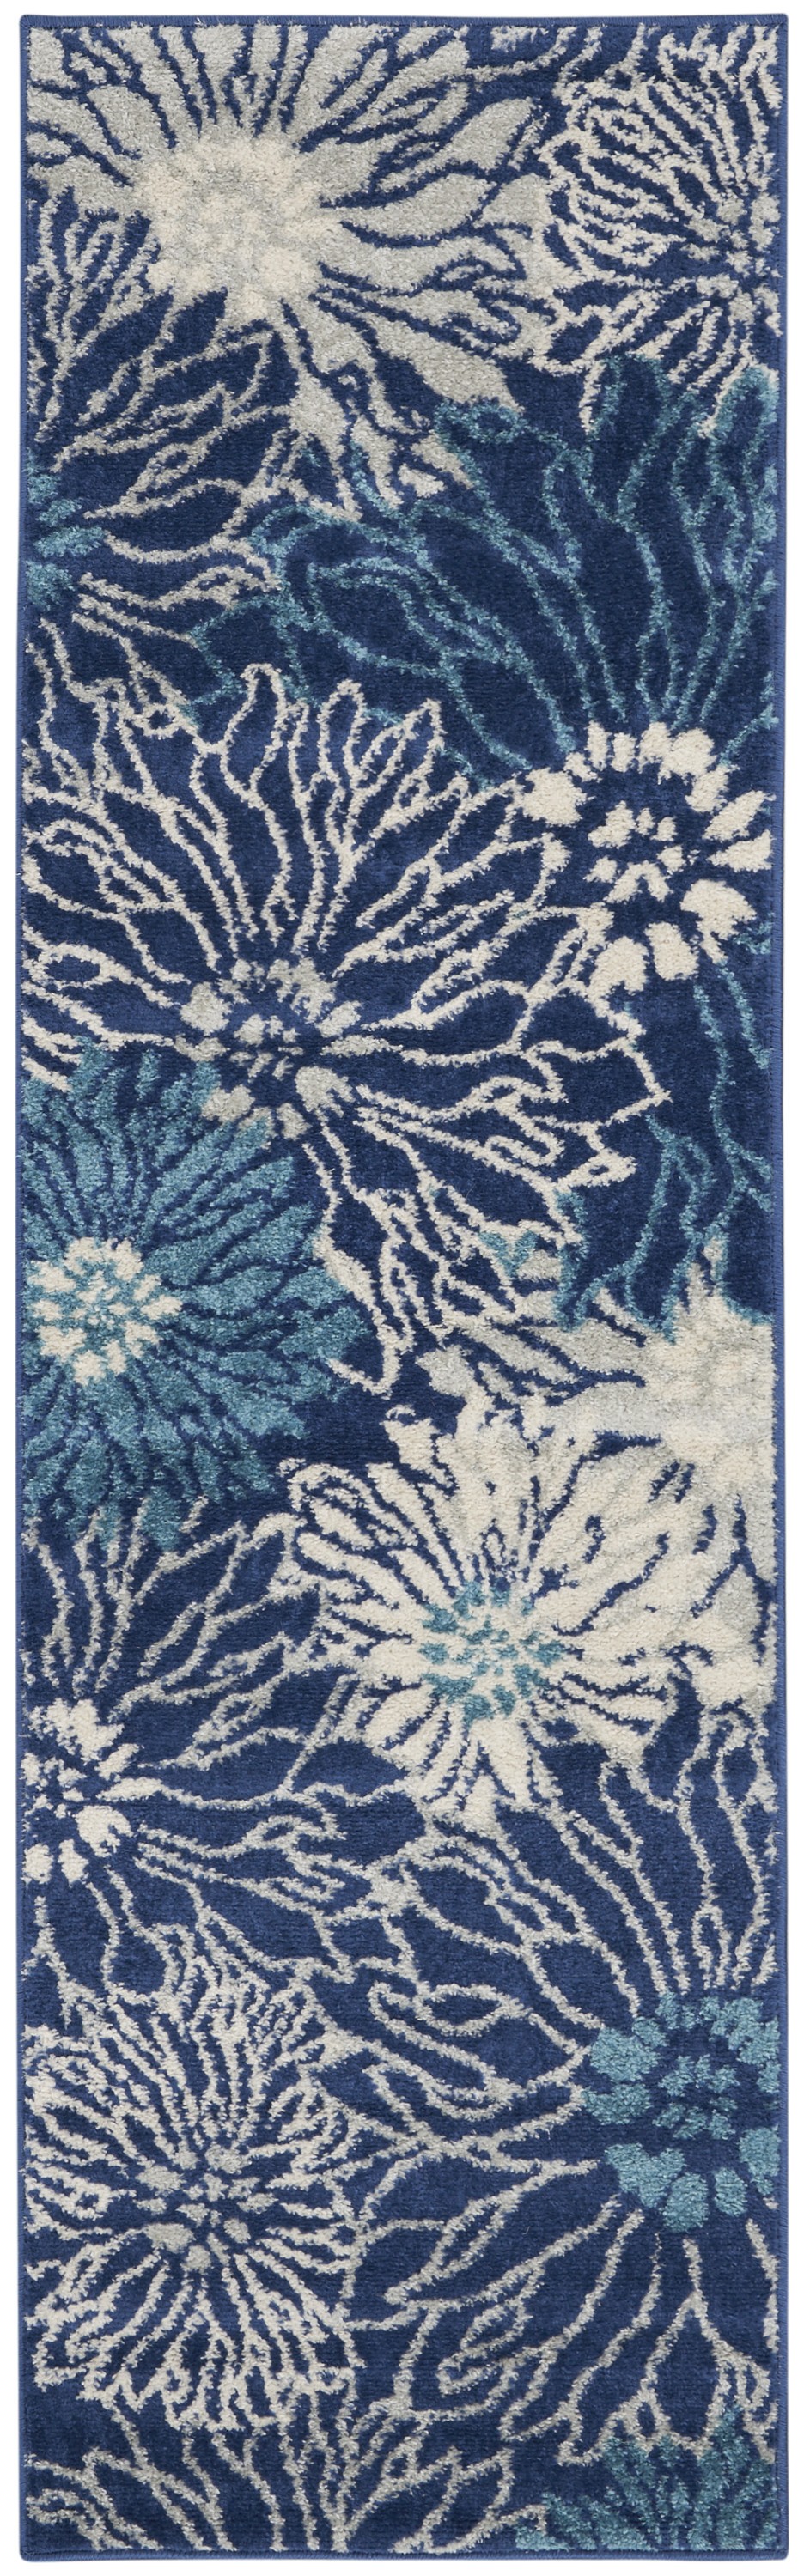 6' Blue And Ivory Floral Dhurrie Runner Rug-385431-1